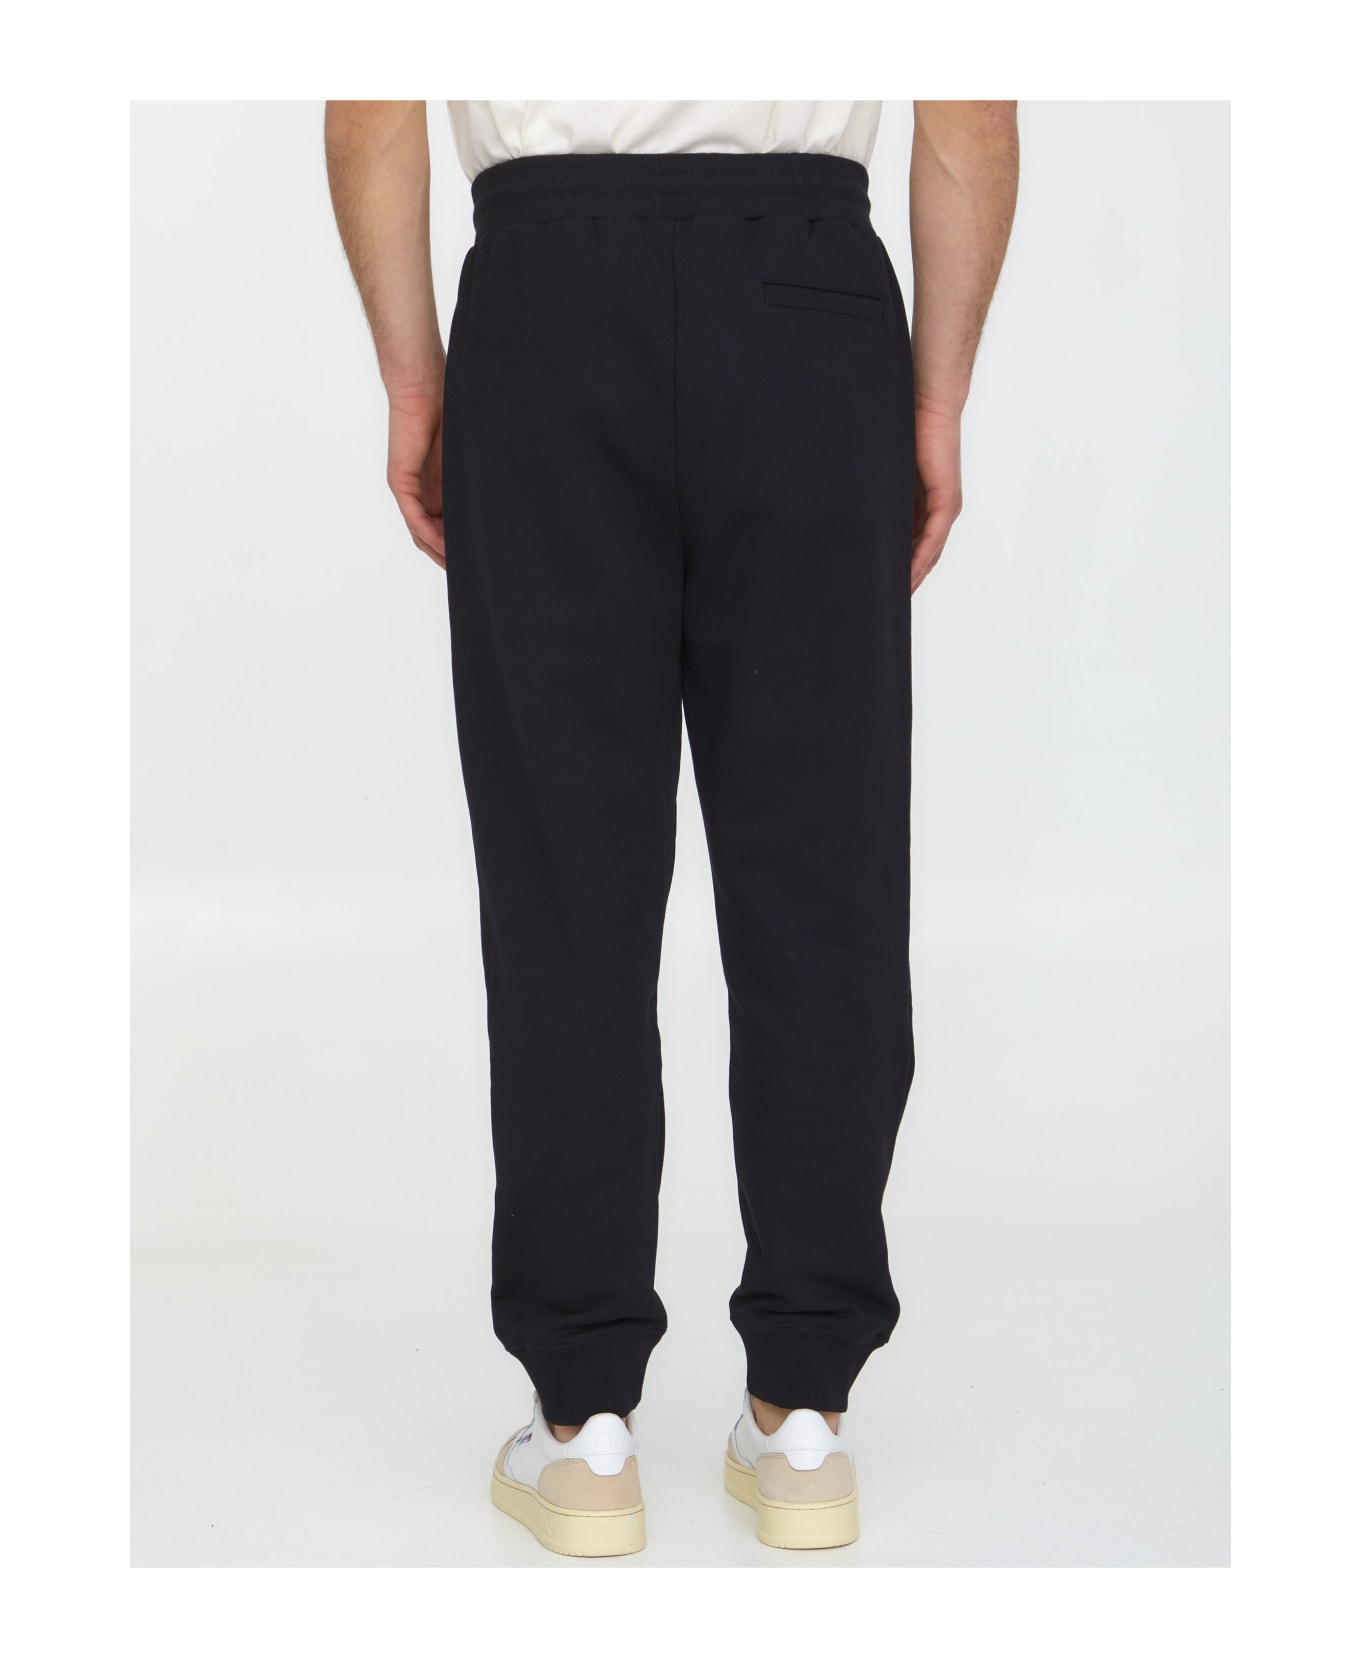 A-COLD-WALL Essential Logo Track Pants - BLACK スウェットパンツ